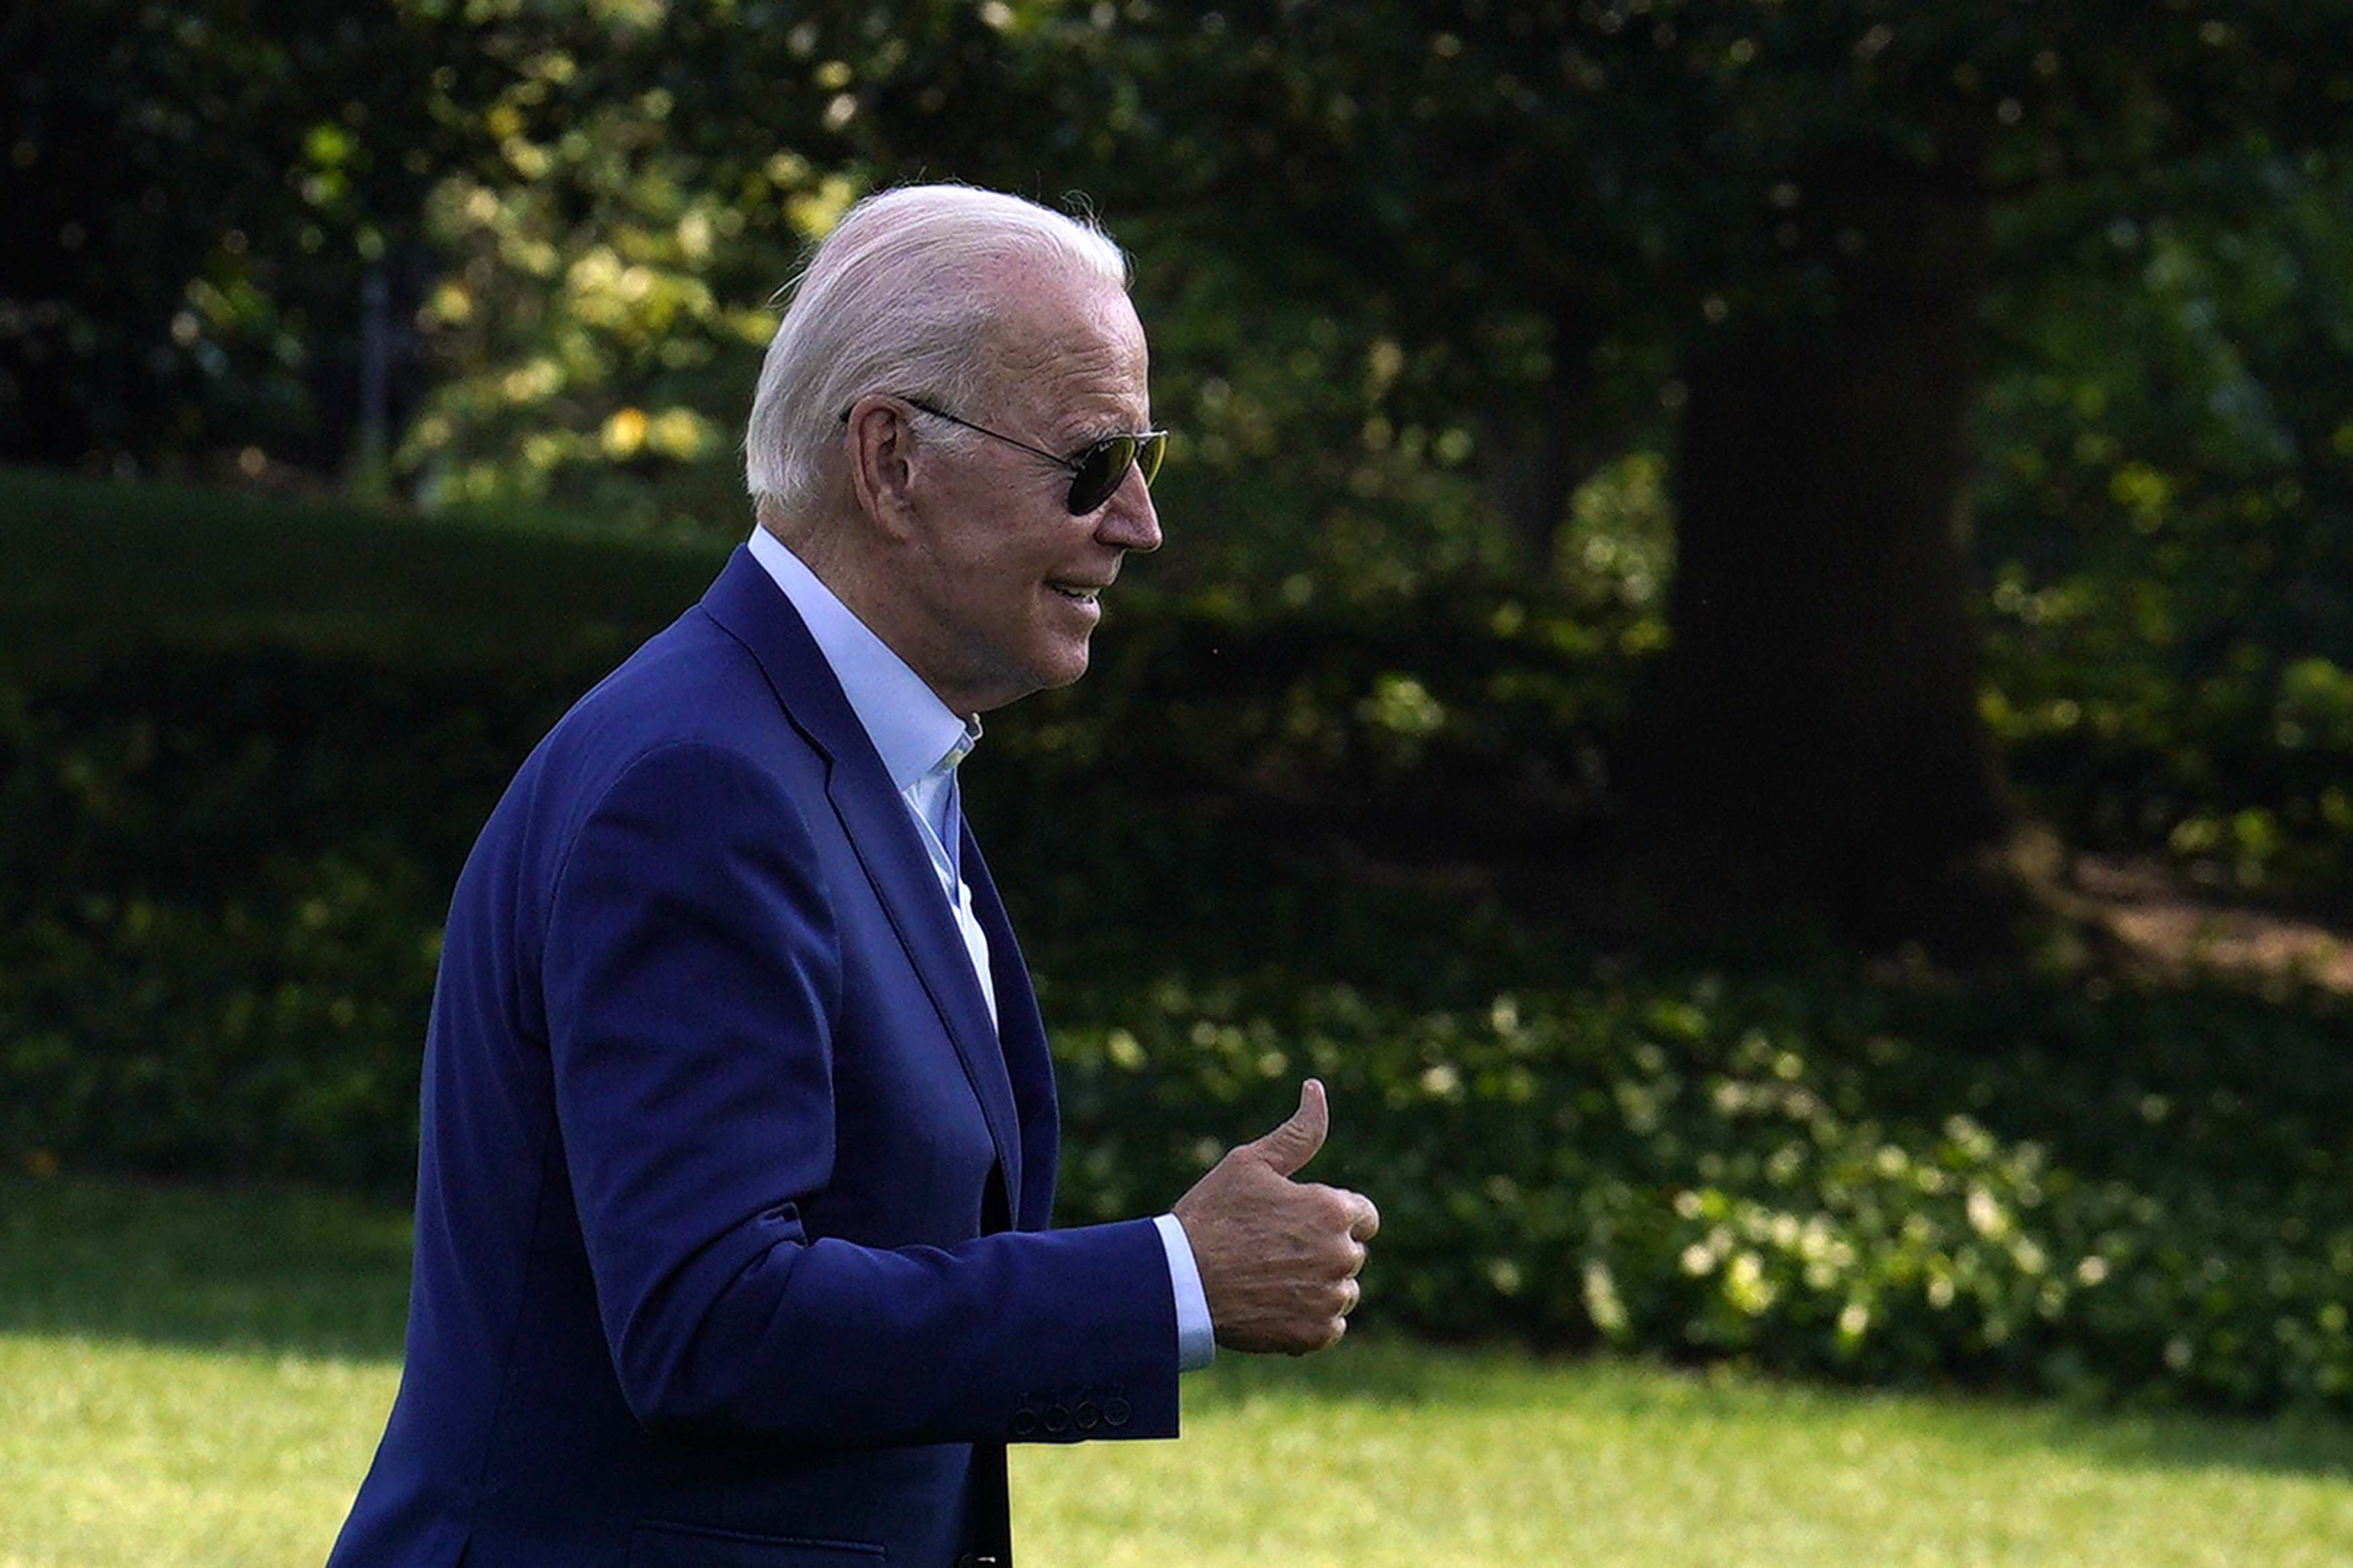 US President Joe Biden gives a thumbs up on the South Lawn of the White House after arriving on Marine One in Washington, D.C.